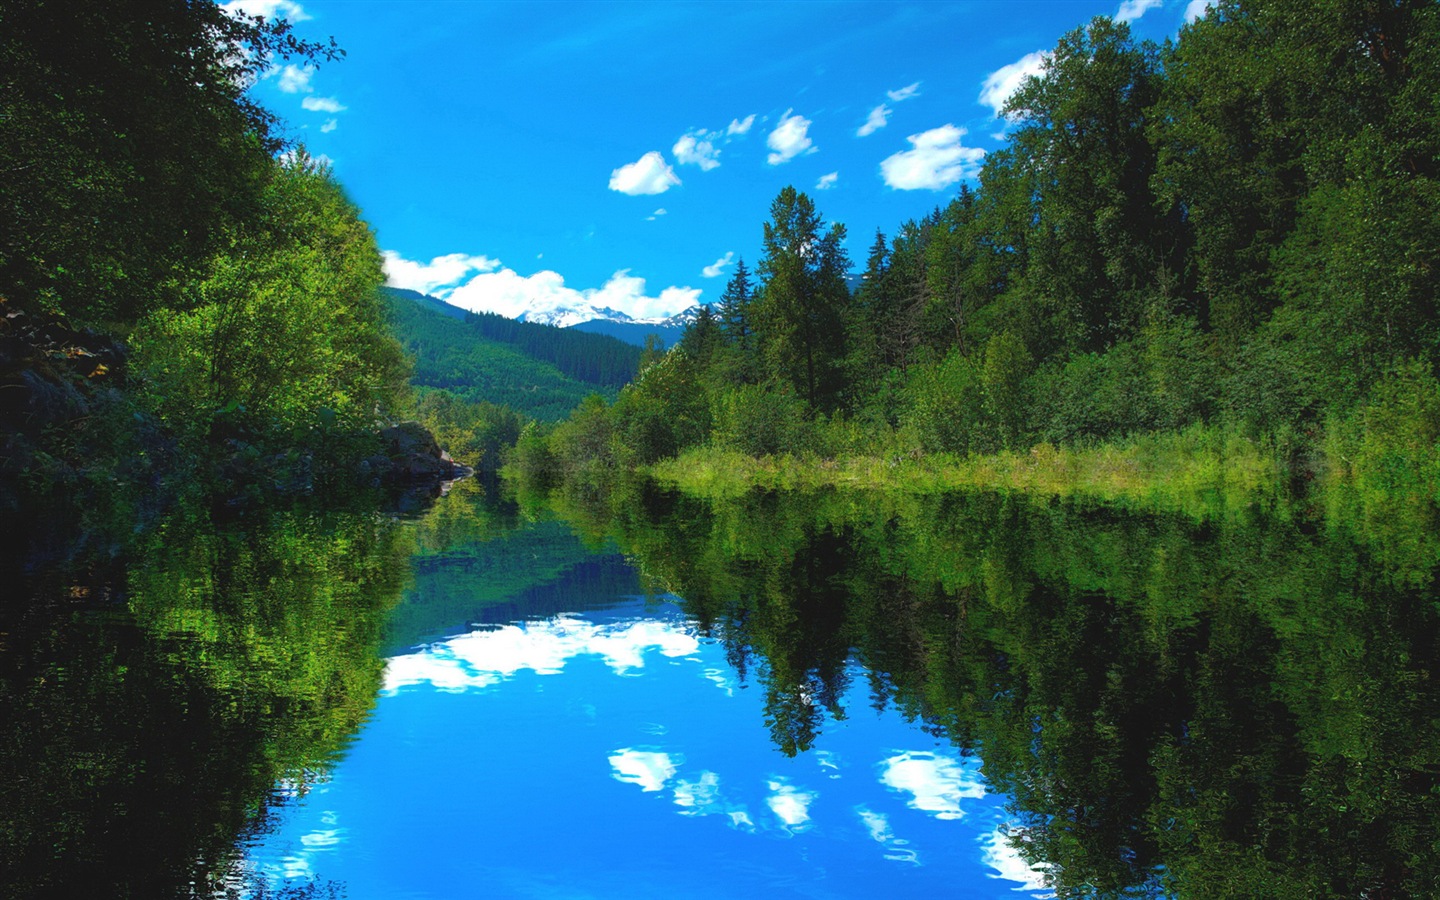 Reflection in the water natural scenery wallpaper #4 - 1440x900